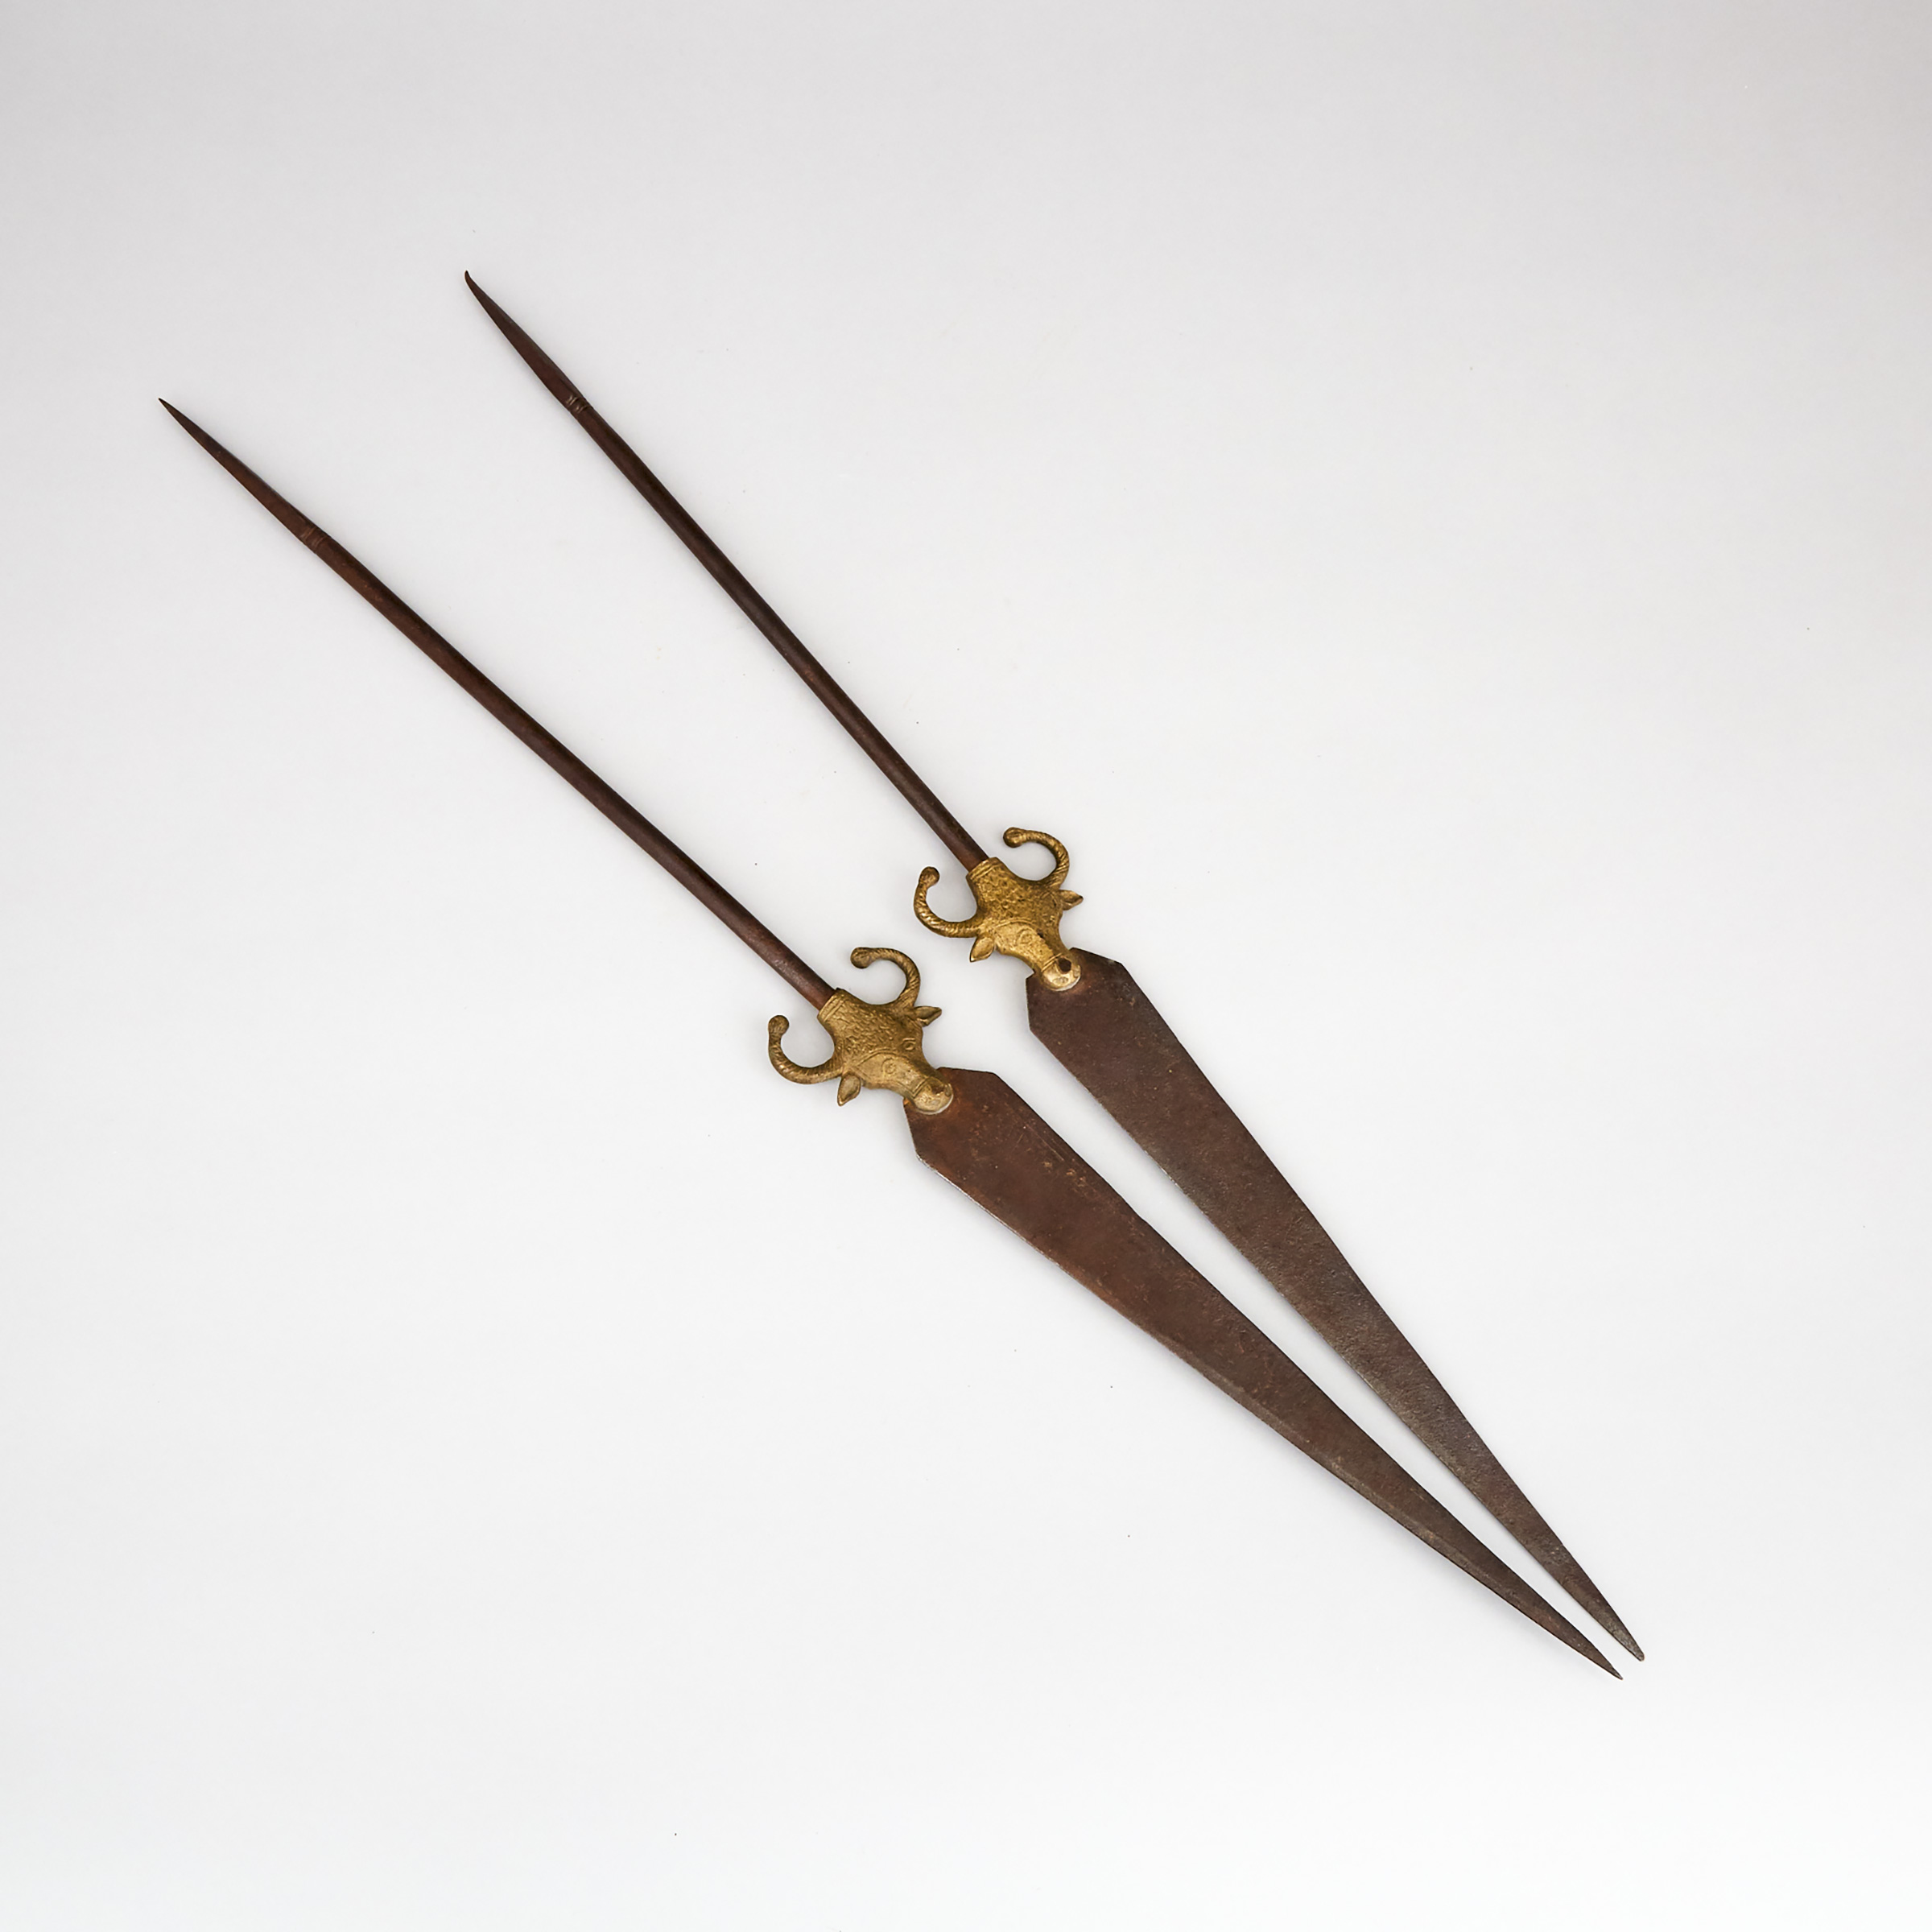 Pair of Bronze Bull Head Mounted Iron Lances/Skewers, early 20th century